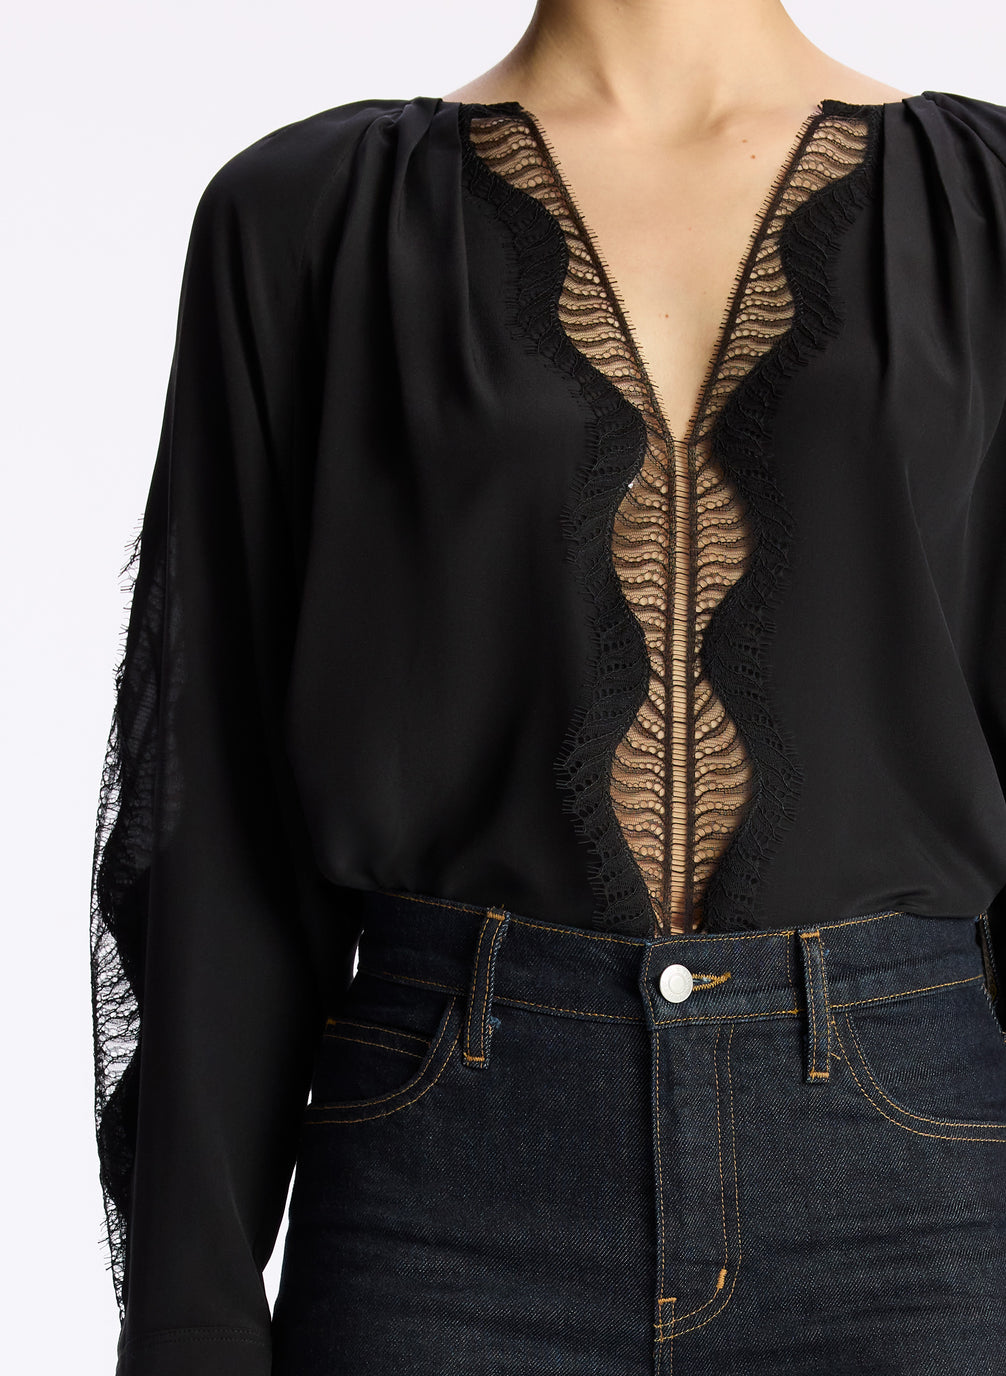 detail view of woman wearing black silk and lace long sleeve top and dark wash denim